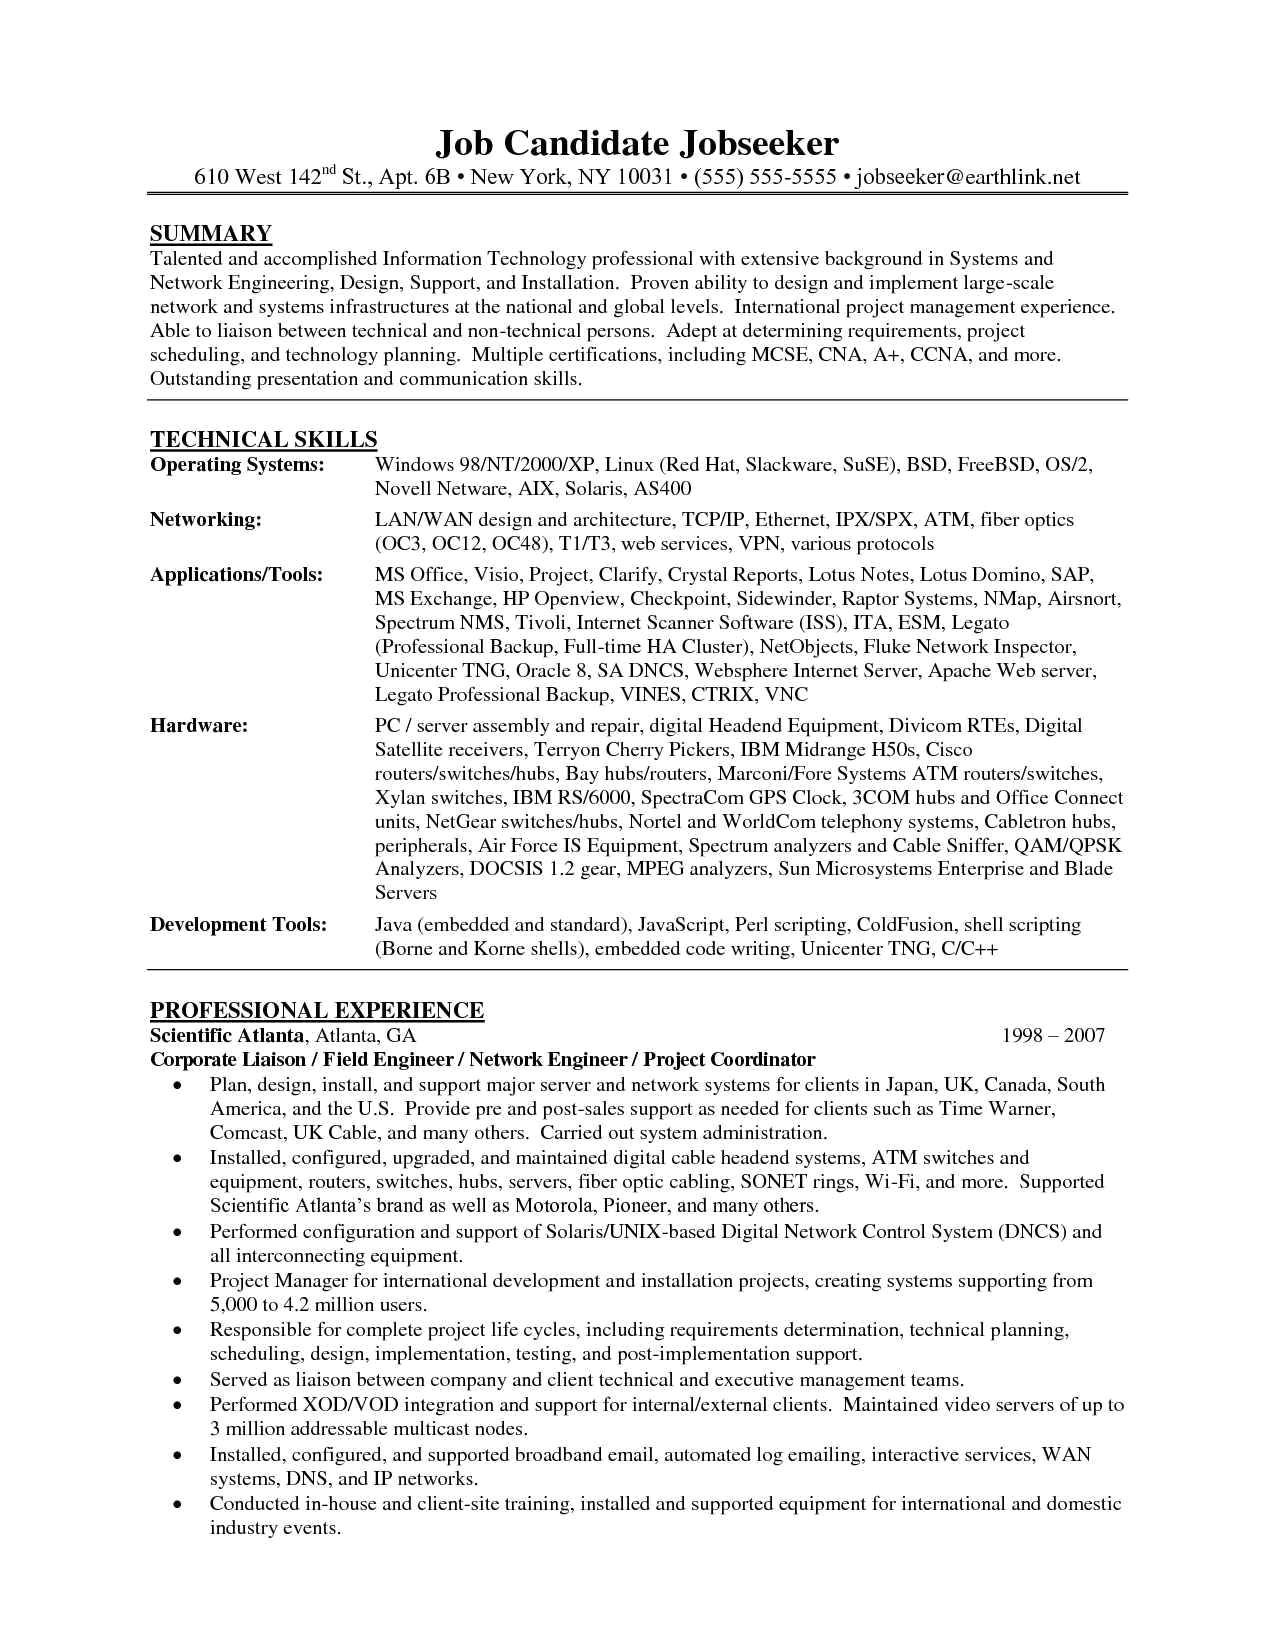 cerner resume samples lovely curriculum formato europeo free sample template excellent